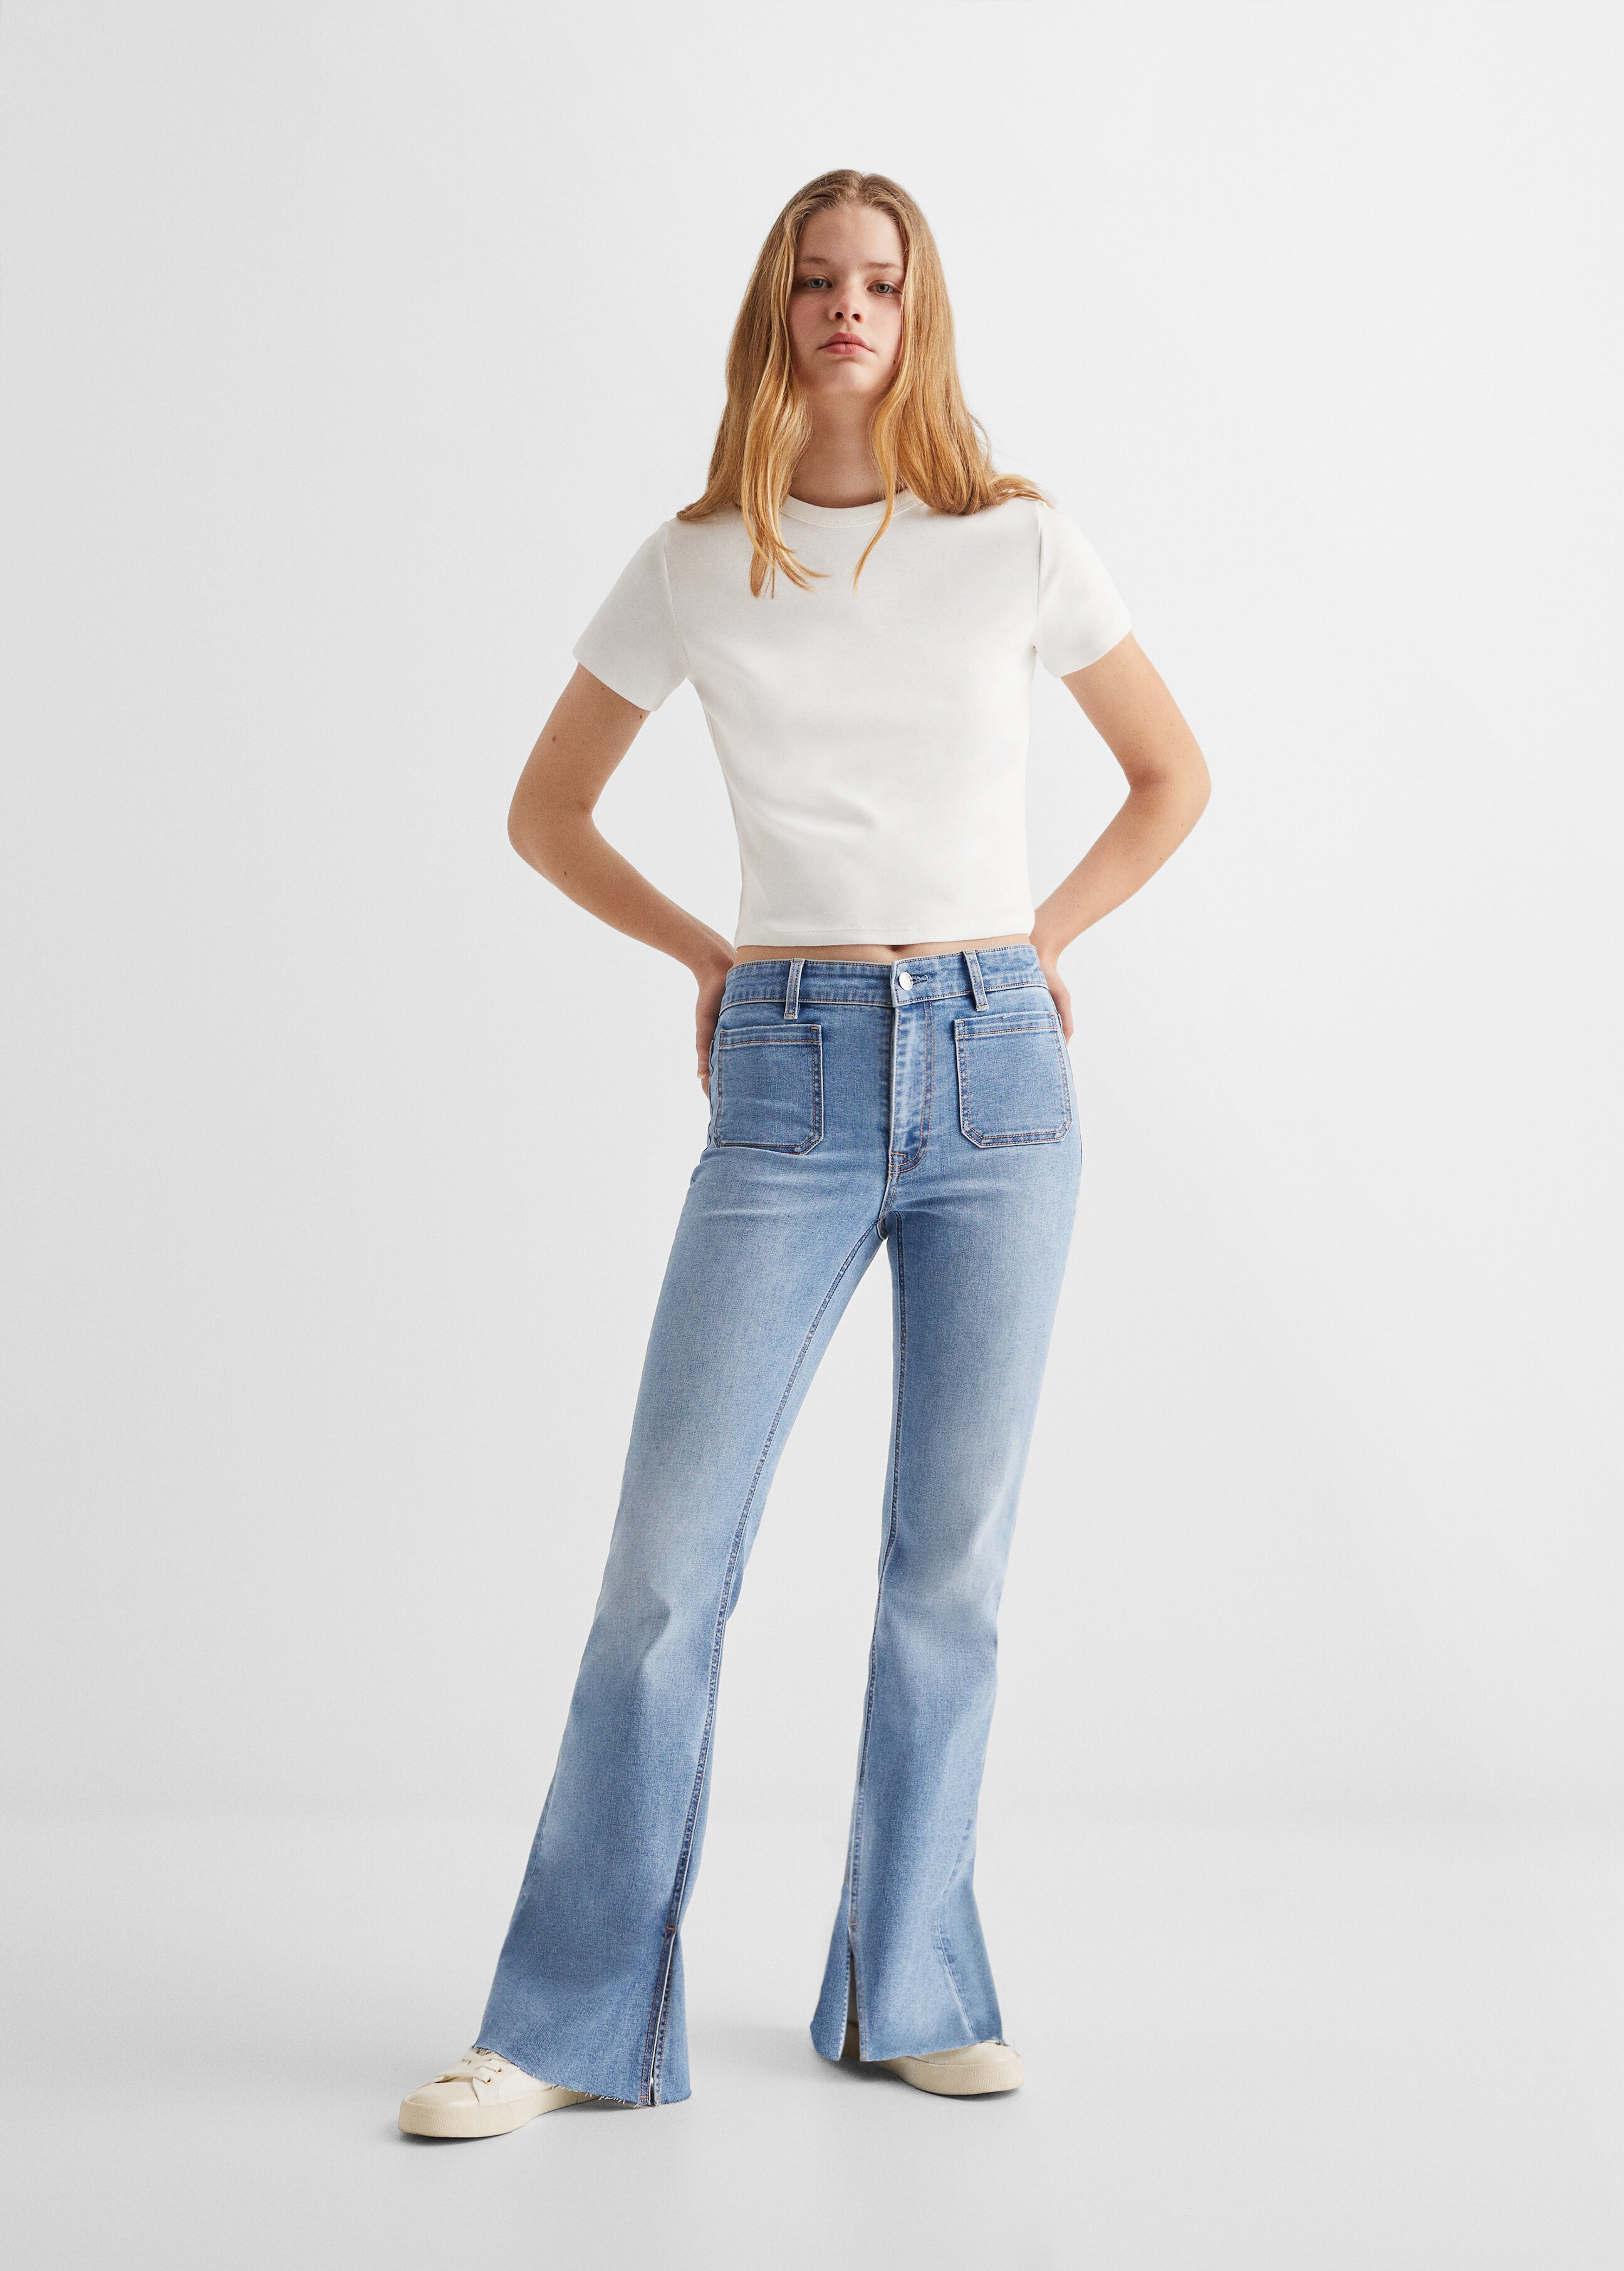 Culotte jeans with openings - Details of the article 1